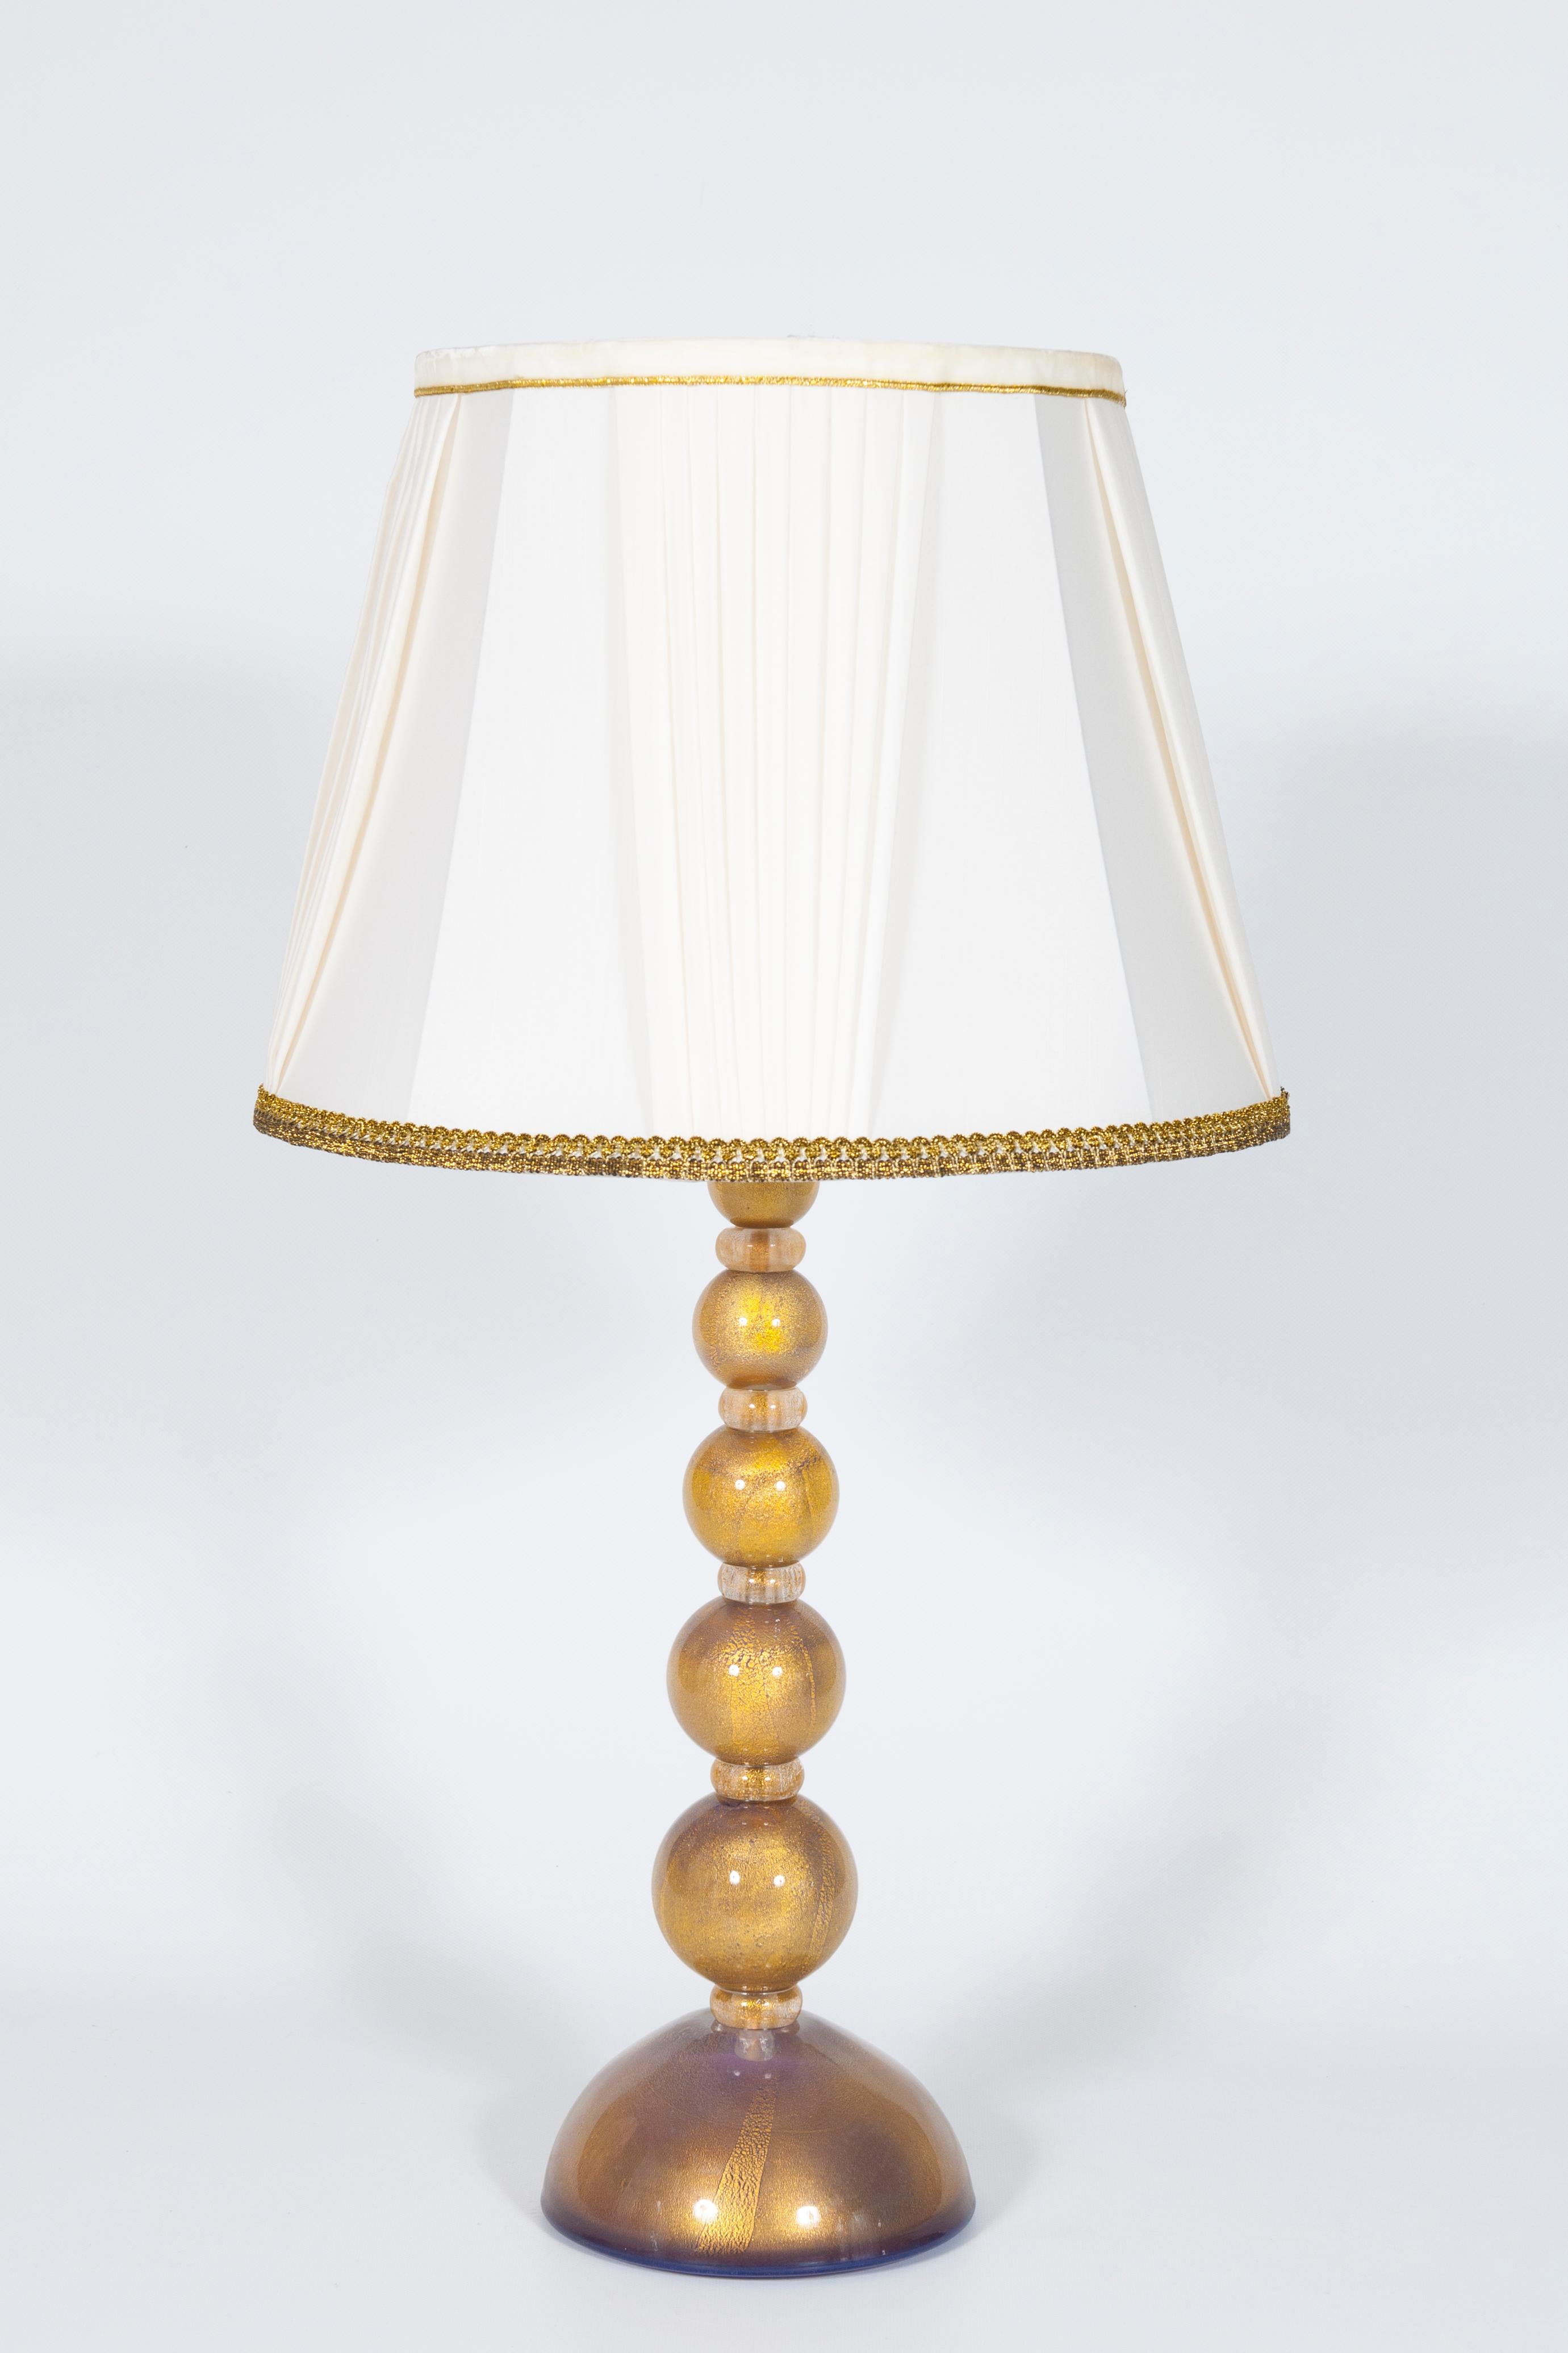 A Pair of Table Lamps Murano Glass Purple and Strong Gold Accents Italy 2000s For Sale 2